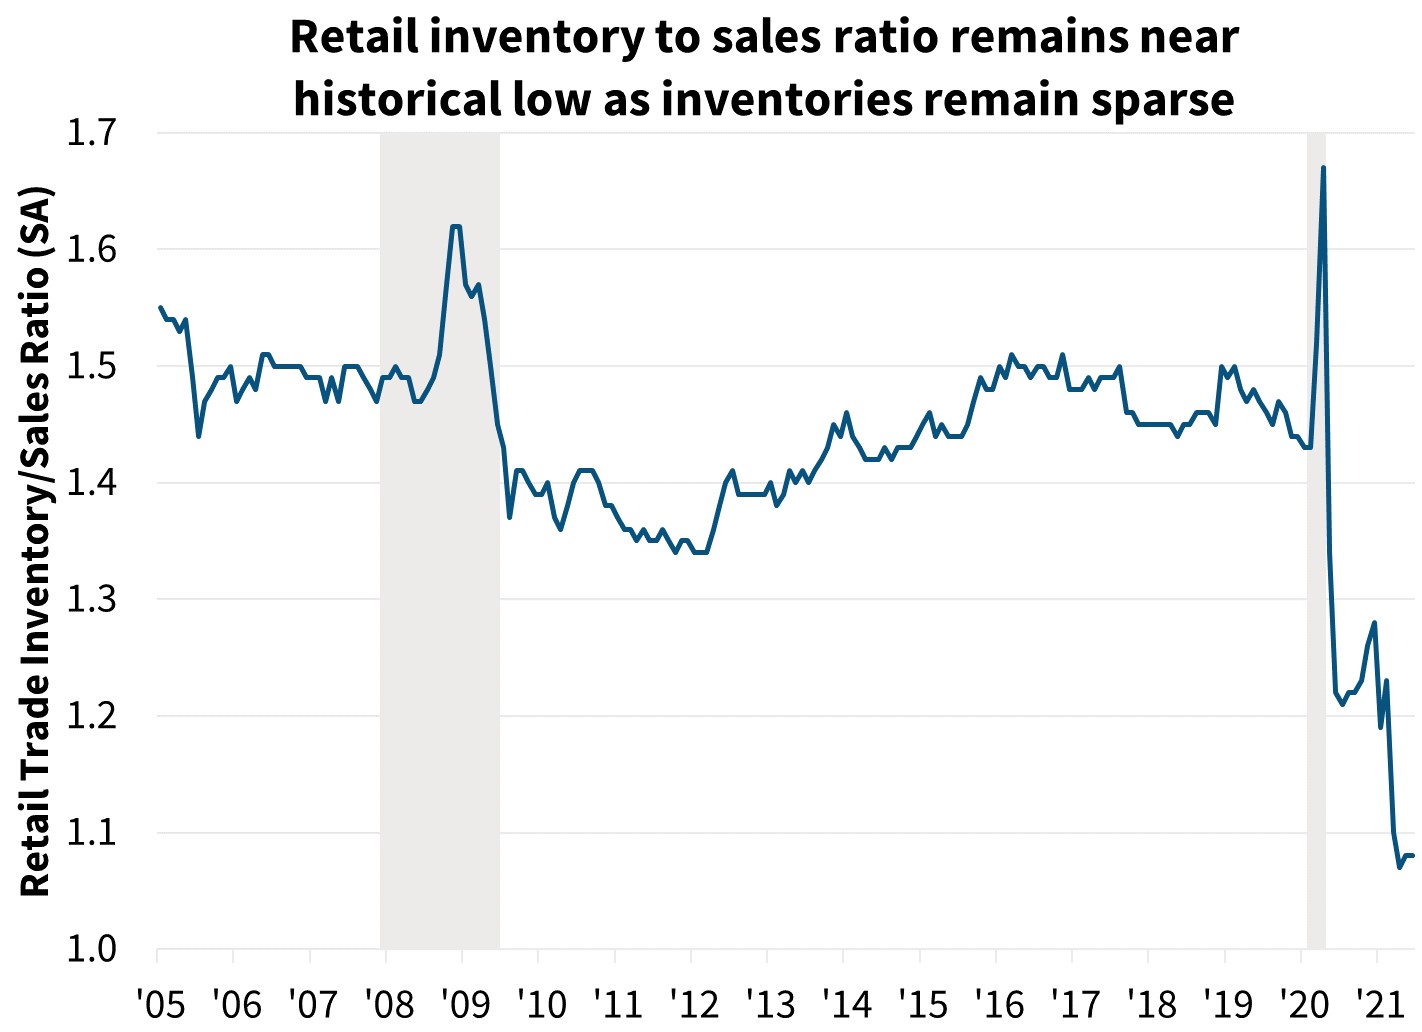  Retail inventory to sales ratio remains near historical low as inventories remain sparse 